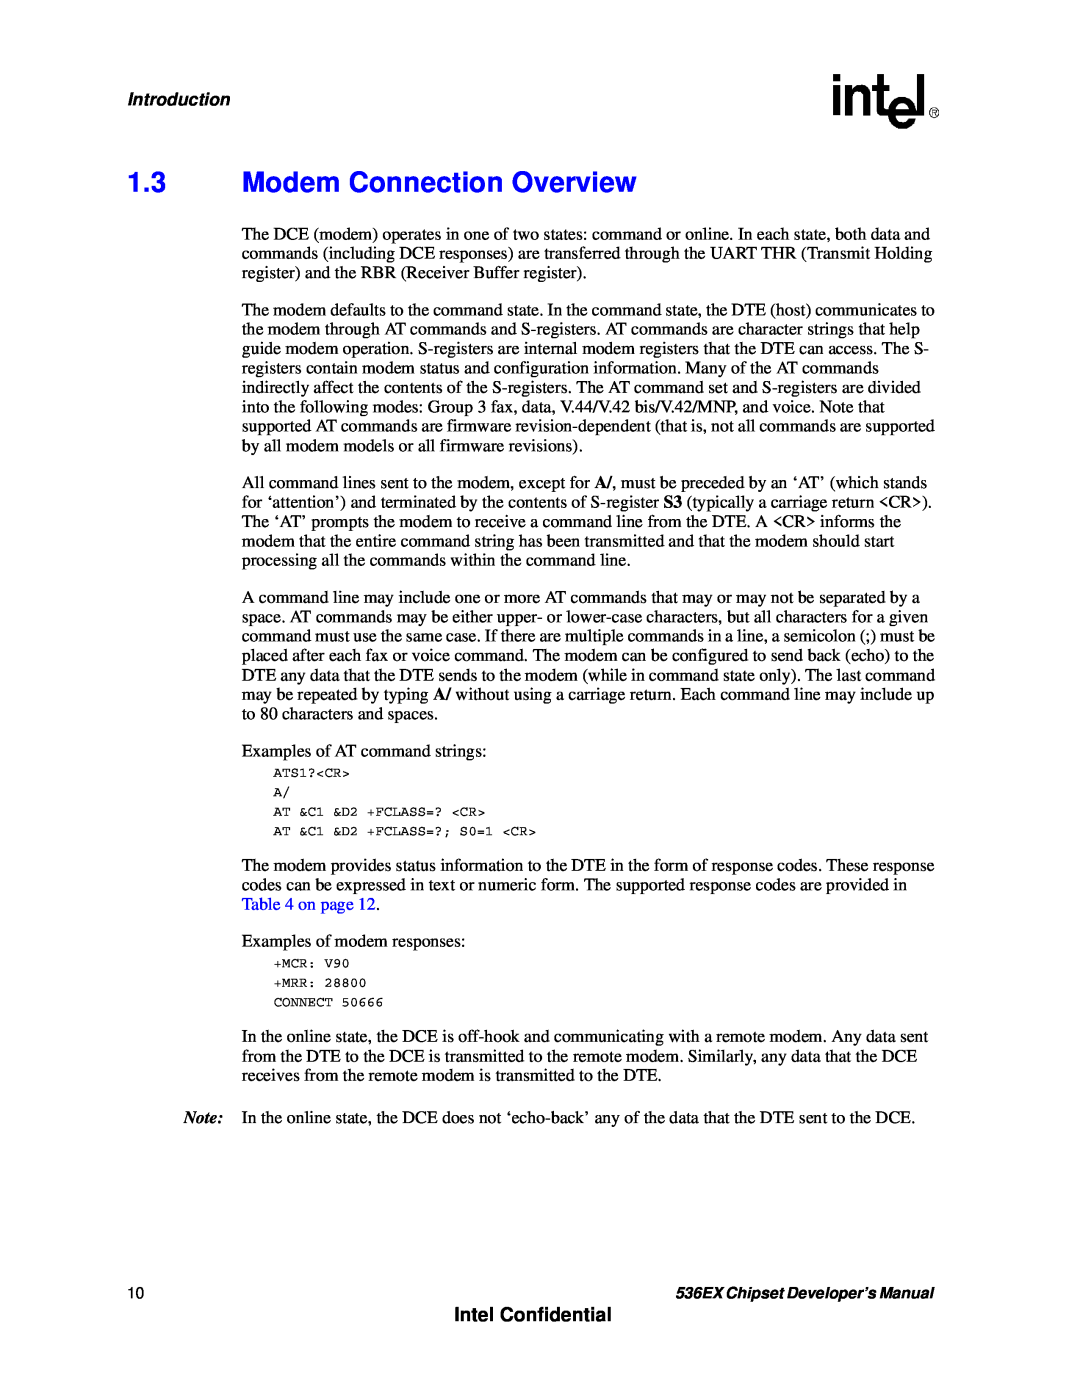 Intel 537EX manual 1.3Modem Connection Overview, Intel Confidential, Introduction 